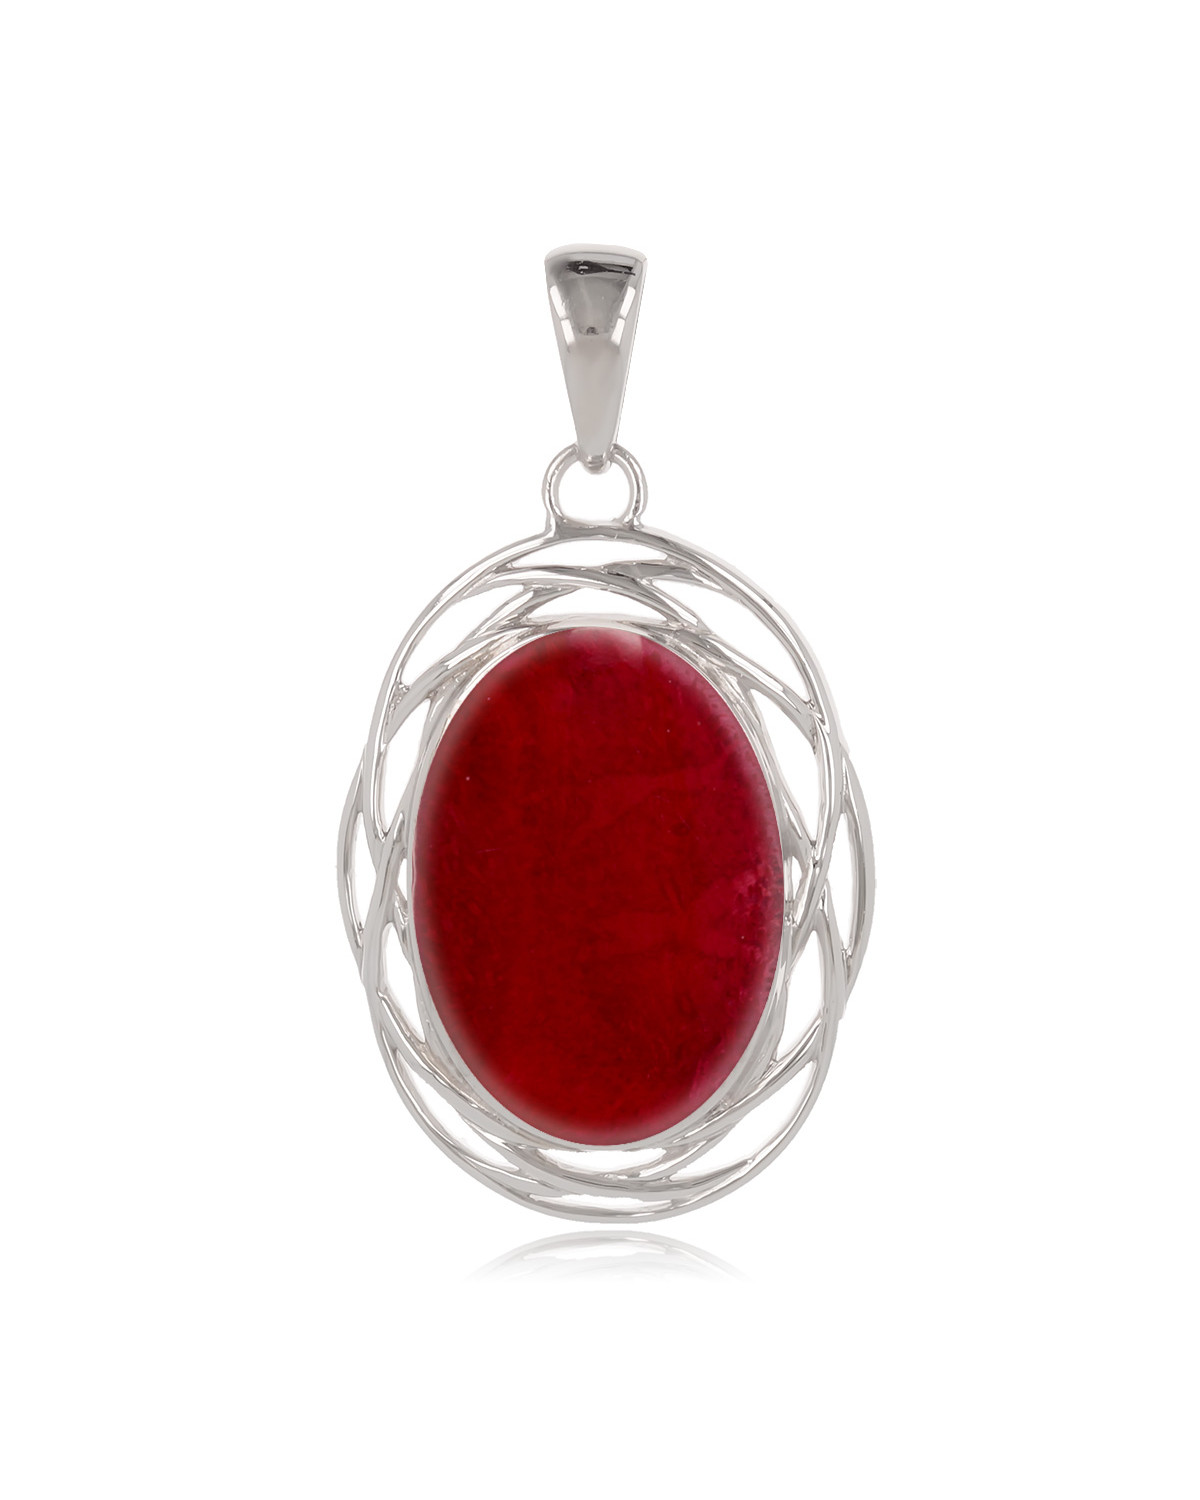 Corail pendant and silver ethnic